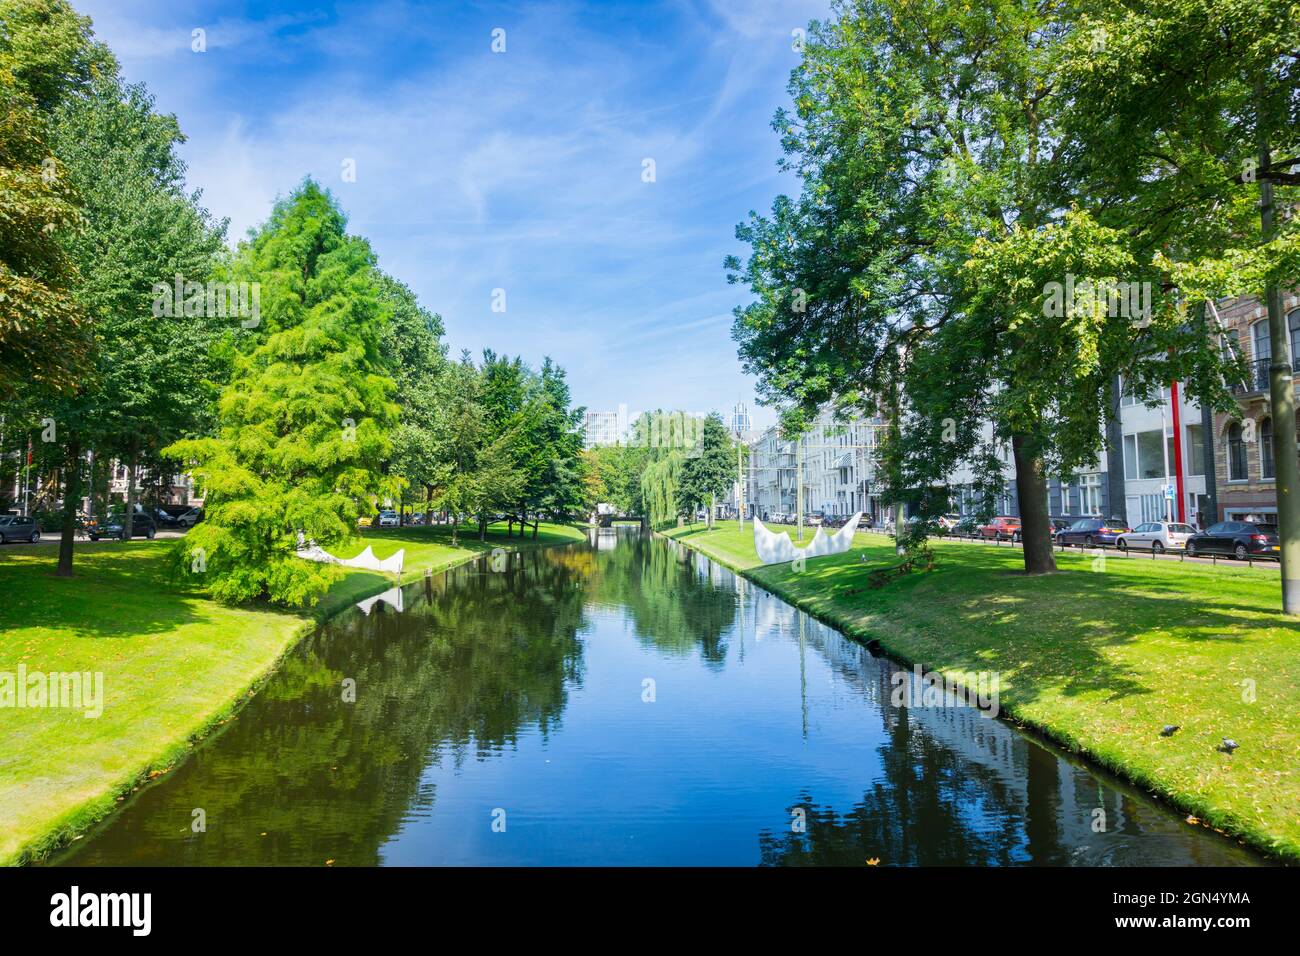 Urban park leafy trees idyllically reflected in calm water of canal running through city under large leafy tree Stock Photo